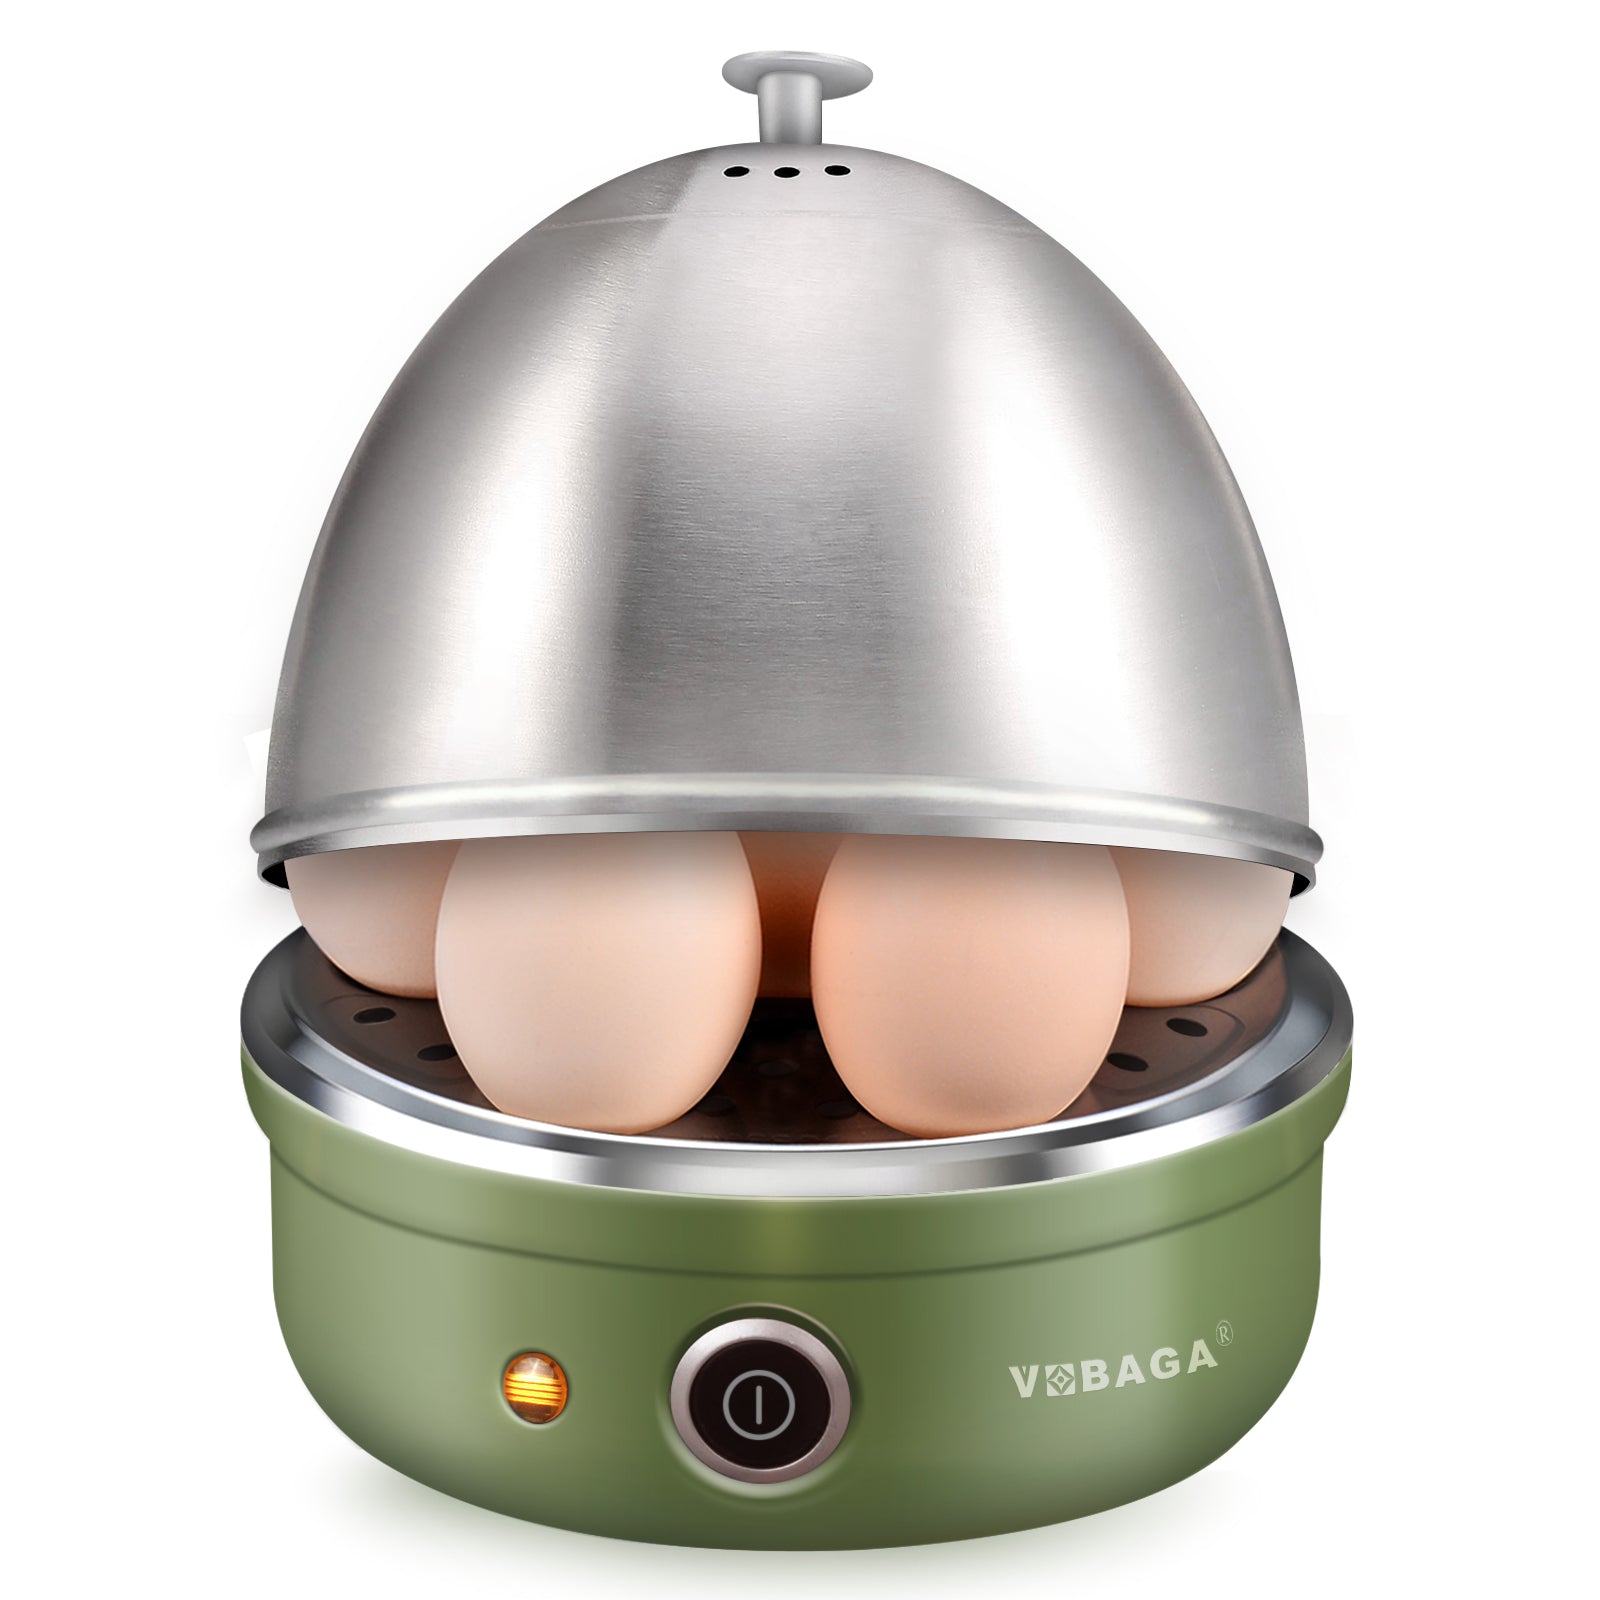 Electric Egg Cooker Rapid Egg Boiler with Auto Shut Off for Soft Stainless Steel Tray